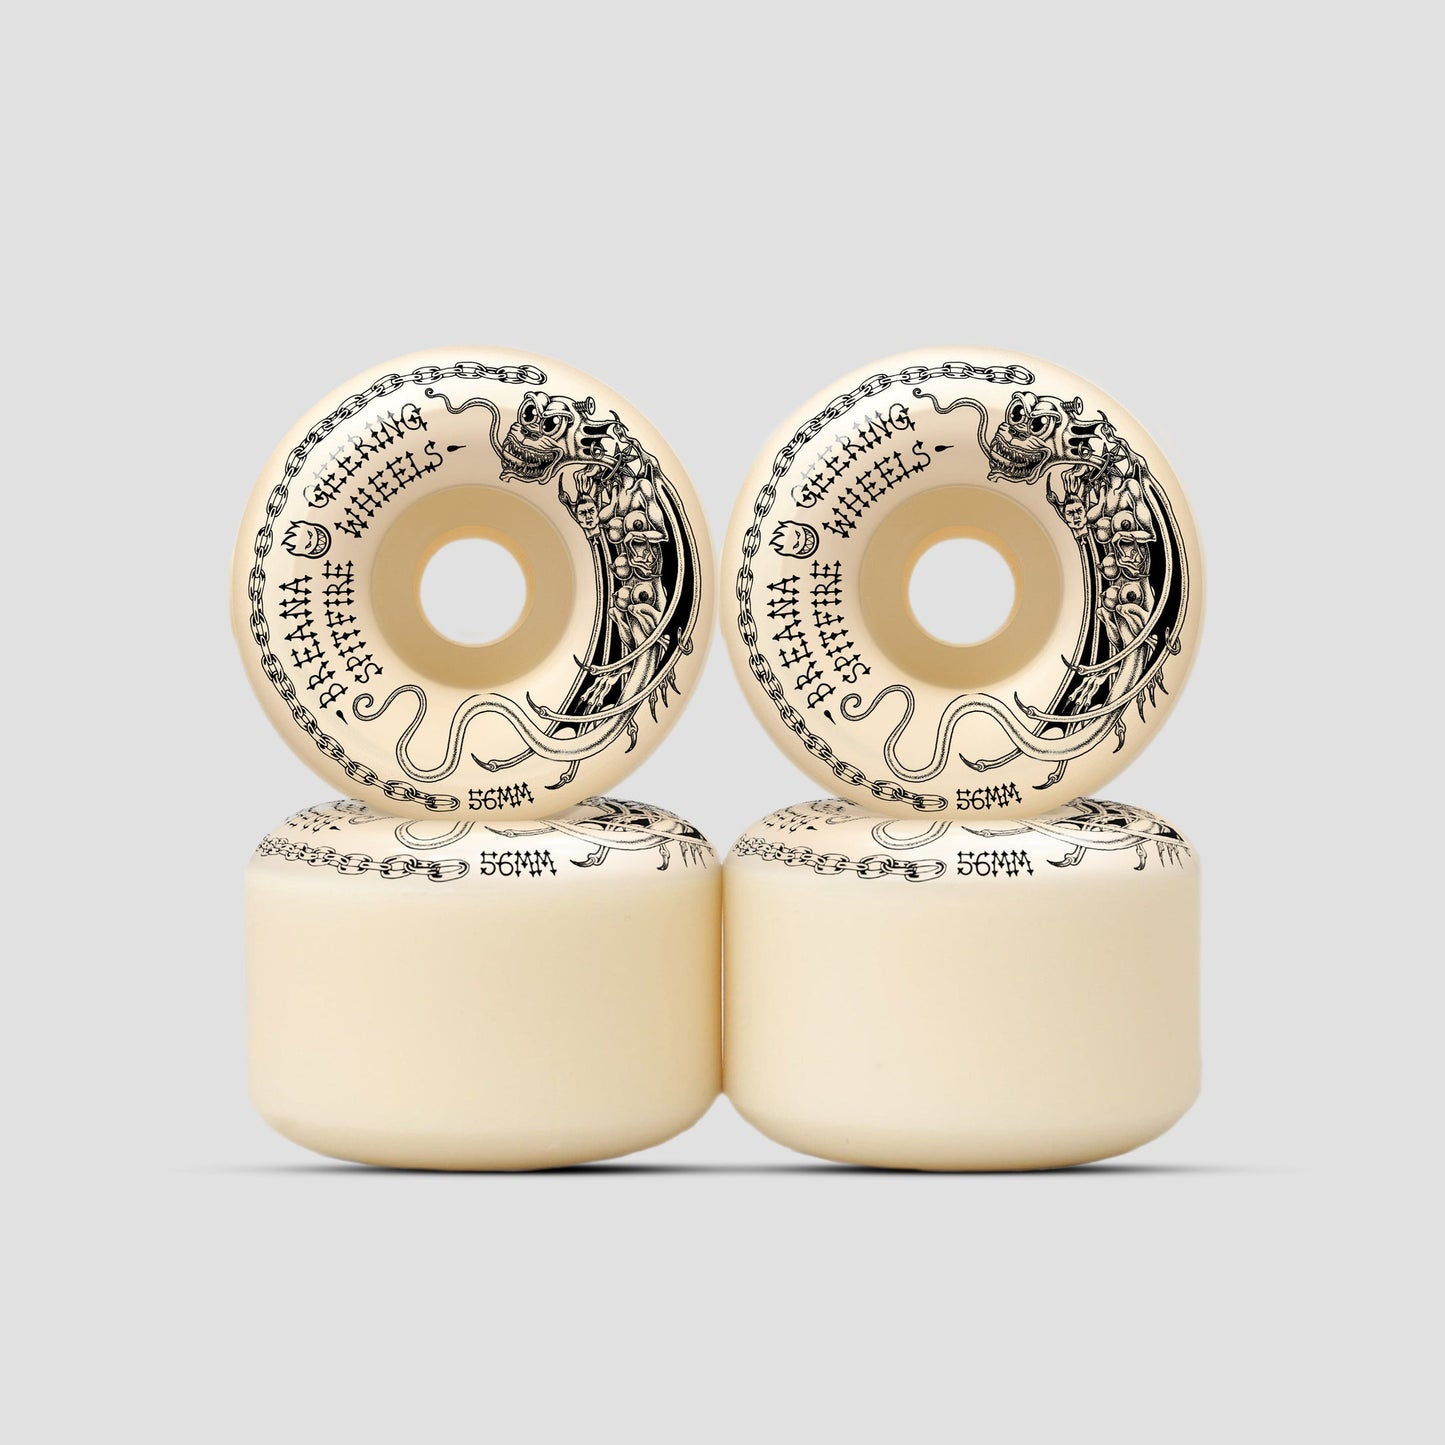 SPITFIRE BREANA GEERING TORMENTOR CONICAL FULL 99A WHEELS 56MM